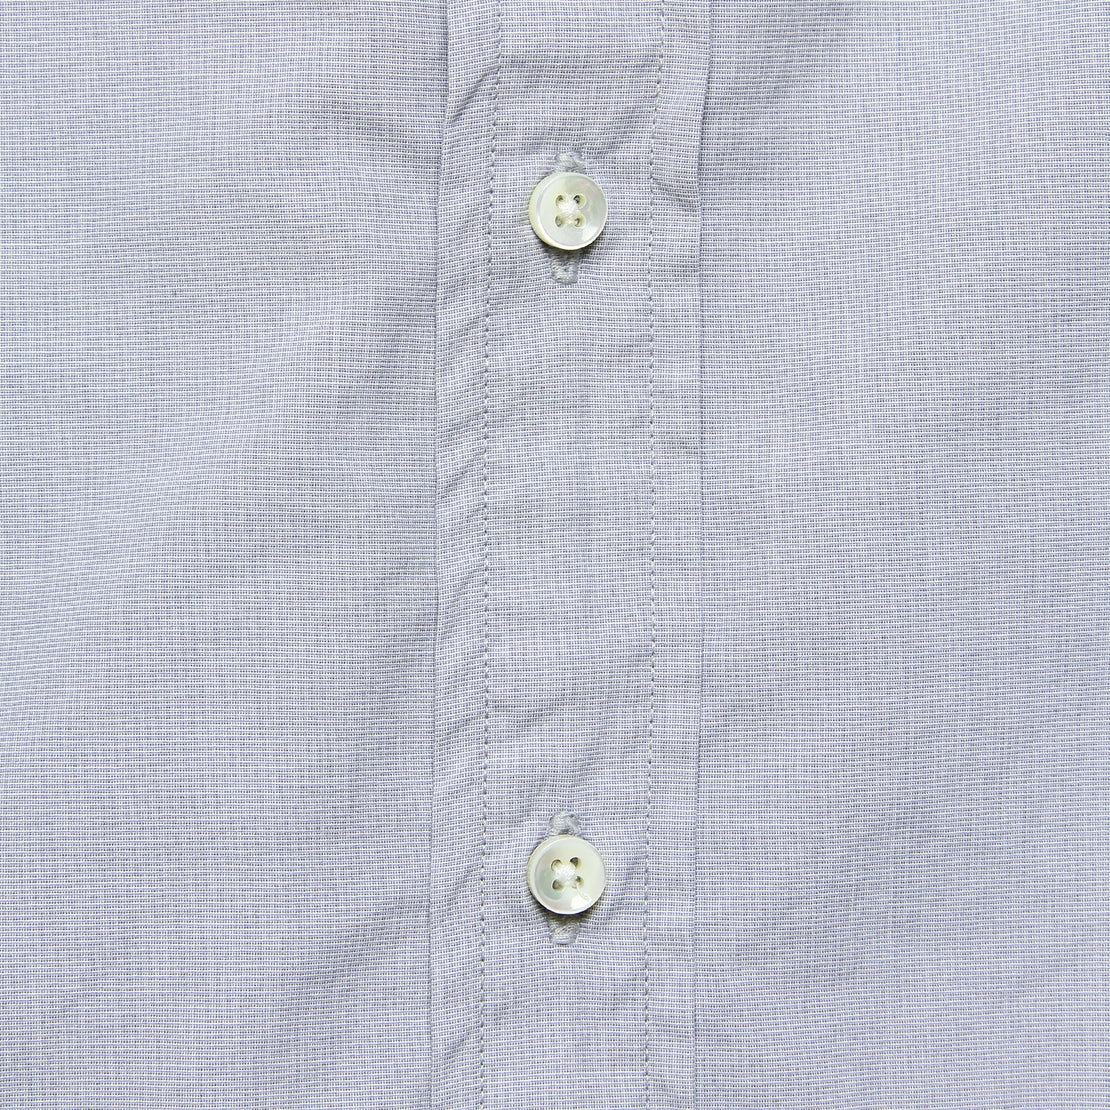 End On End School Shirt - Grey - Alex Mill - STAG Provisions - Tops - L/S Woven - Solid